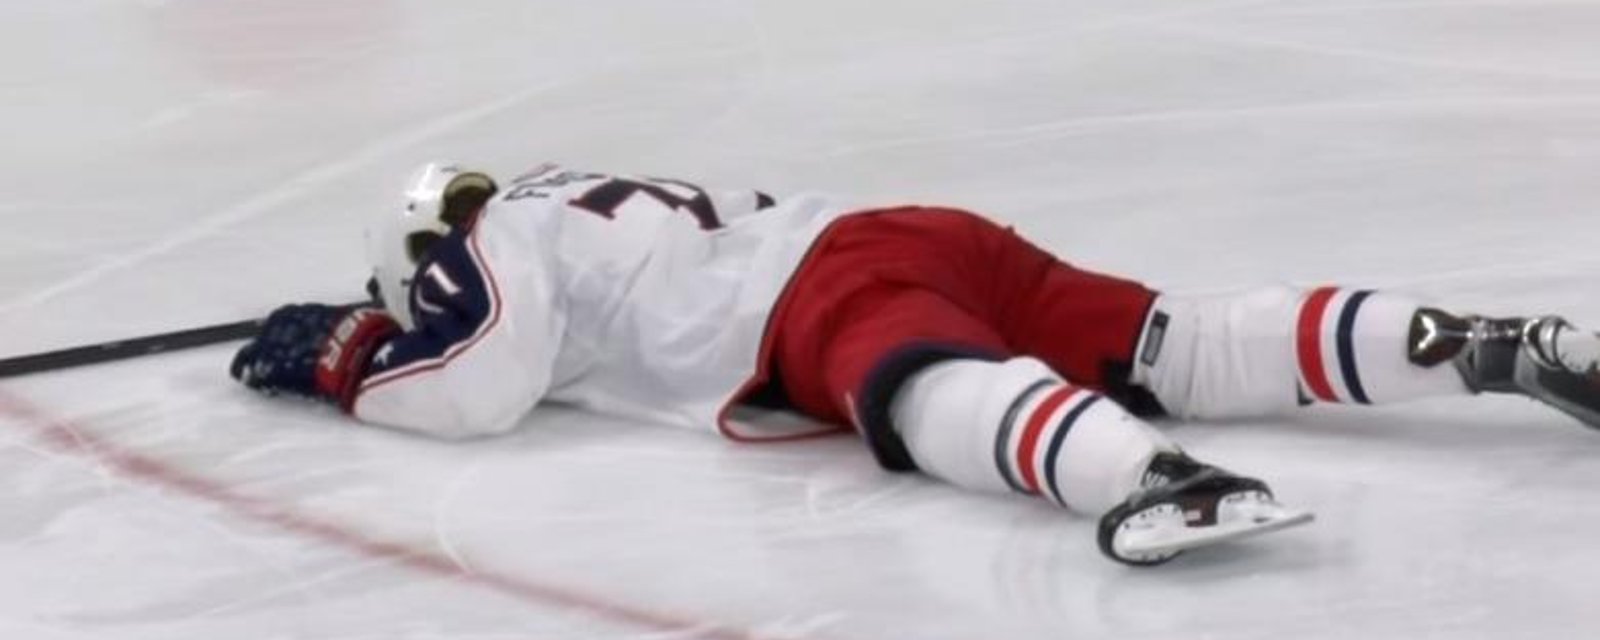 Player knocked out after taking a hit right on the chin.